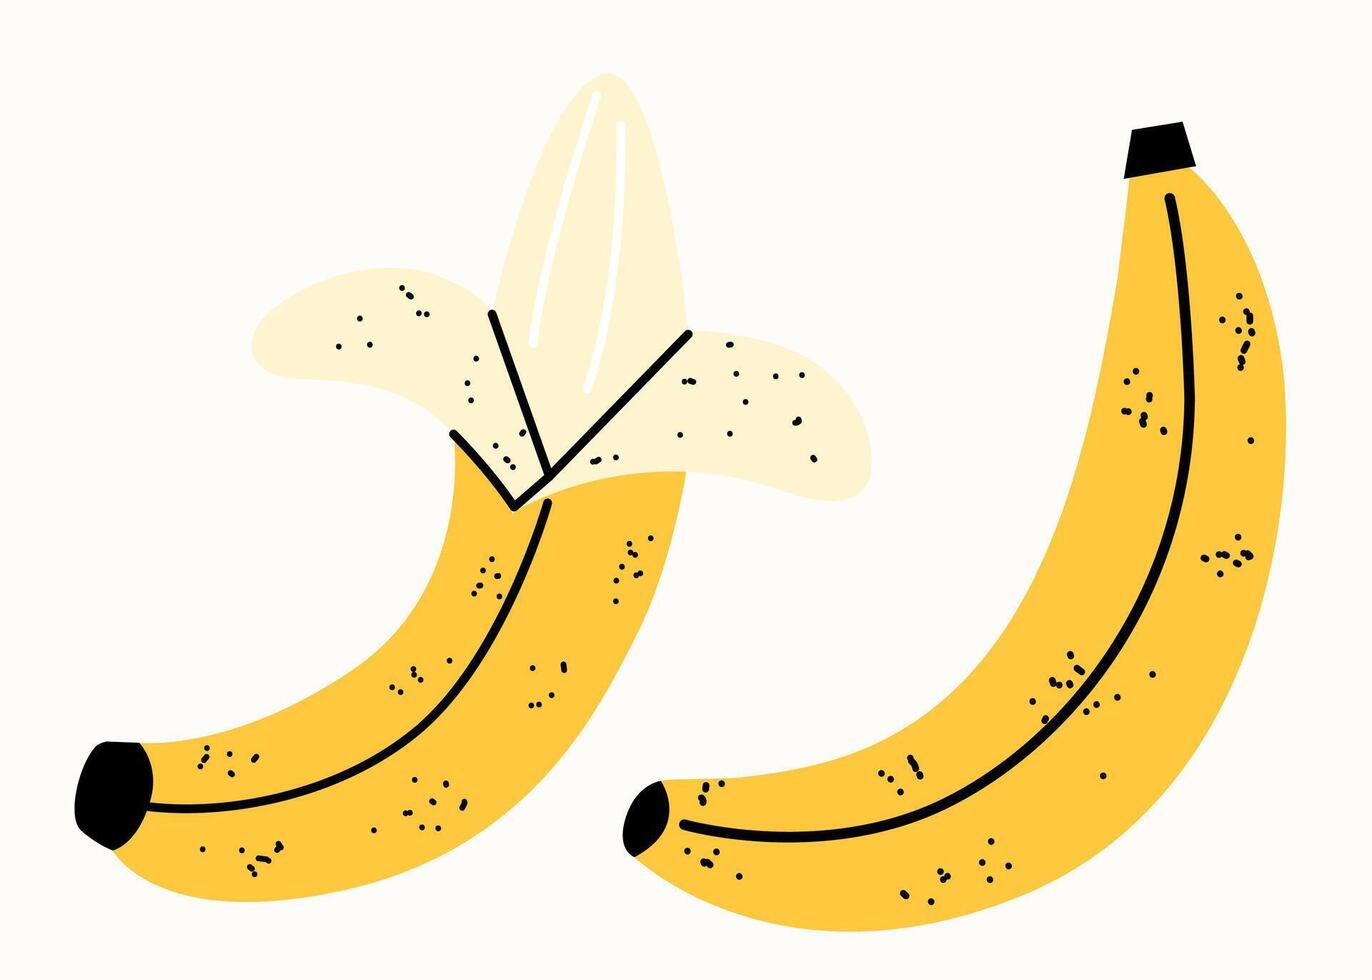 Healthy breakfast. Banana and peeled banana. Set of vector flat illustrations in hand drawn style. Delicious dishes. Cartoon food icons. Isolated on a white background.